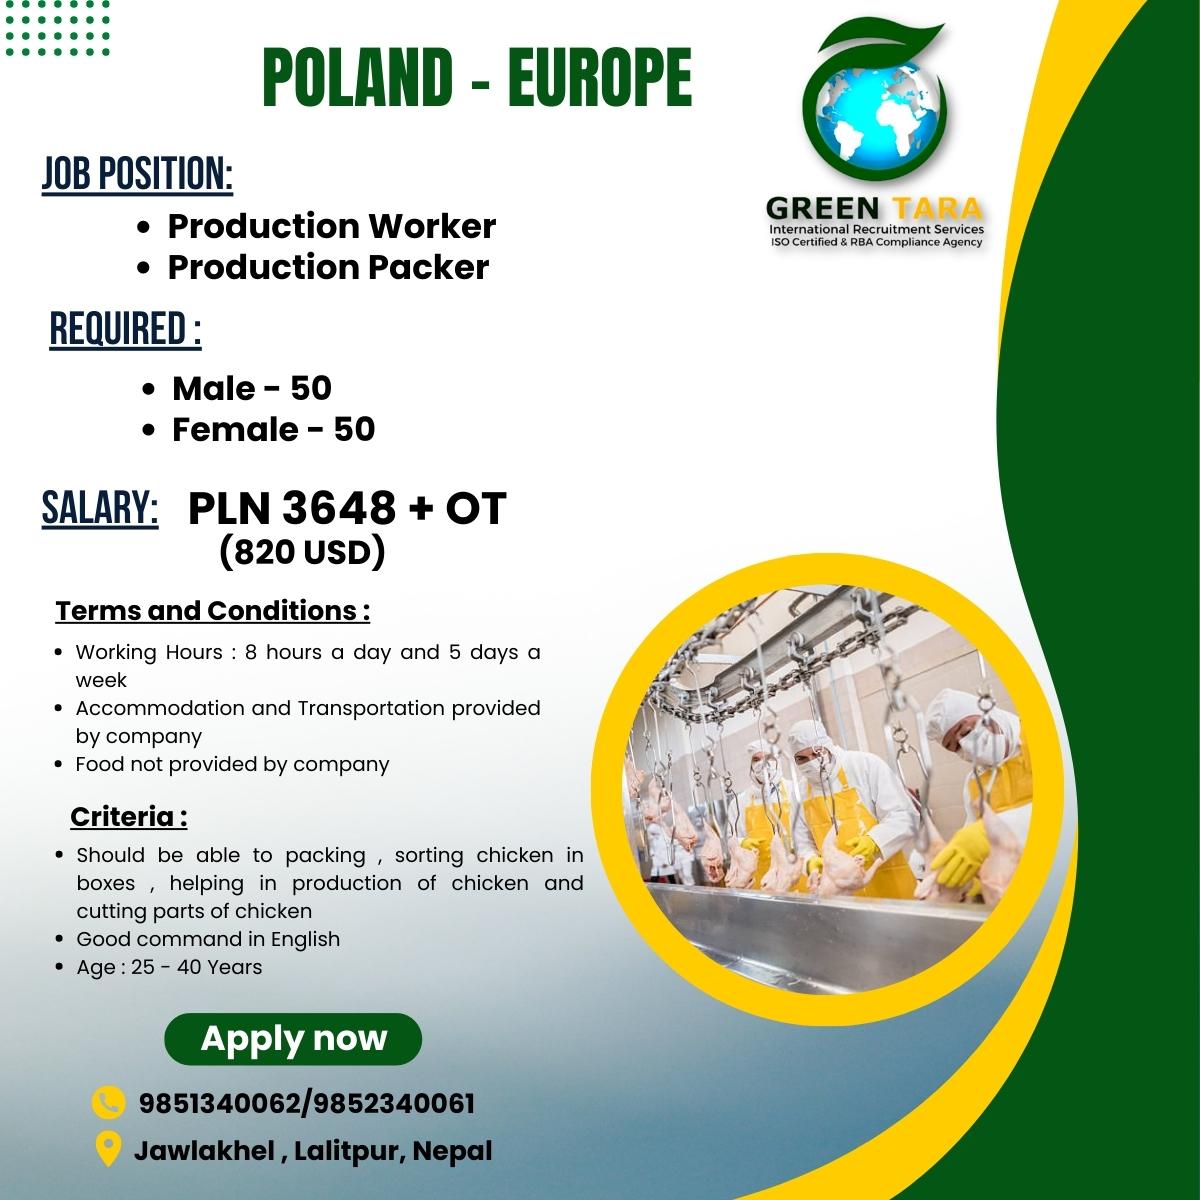 𝐏𝐎𝐋𝐀𝐍𝐃 - 𝐄𝐔𝐑𝐎𝐏𝐄 Get a opportunity to work in chicken production and packing company in Poland Interested candidates may send their CVs on 📷career@greentaraintl.com For more details contact us at 📷9851340062 / 9851340061 #polandjob #europejobs #greentara